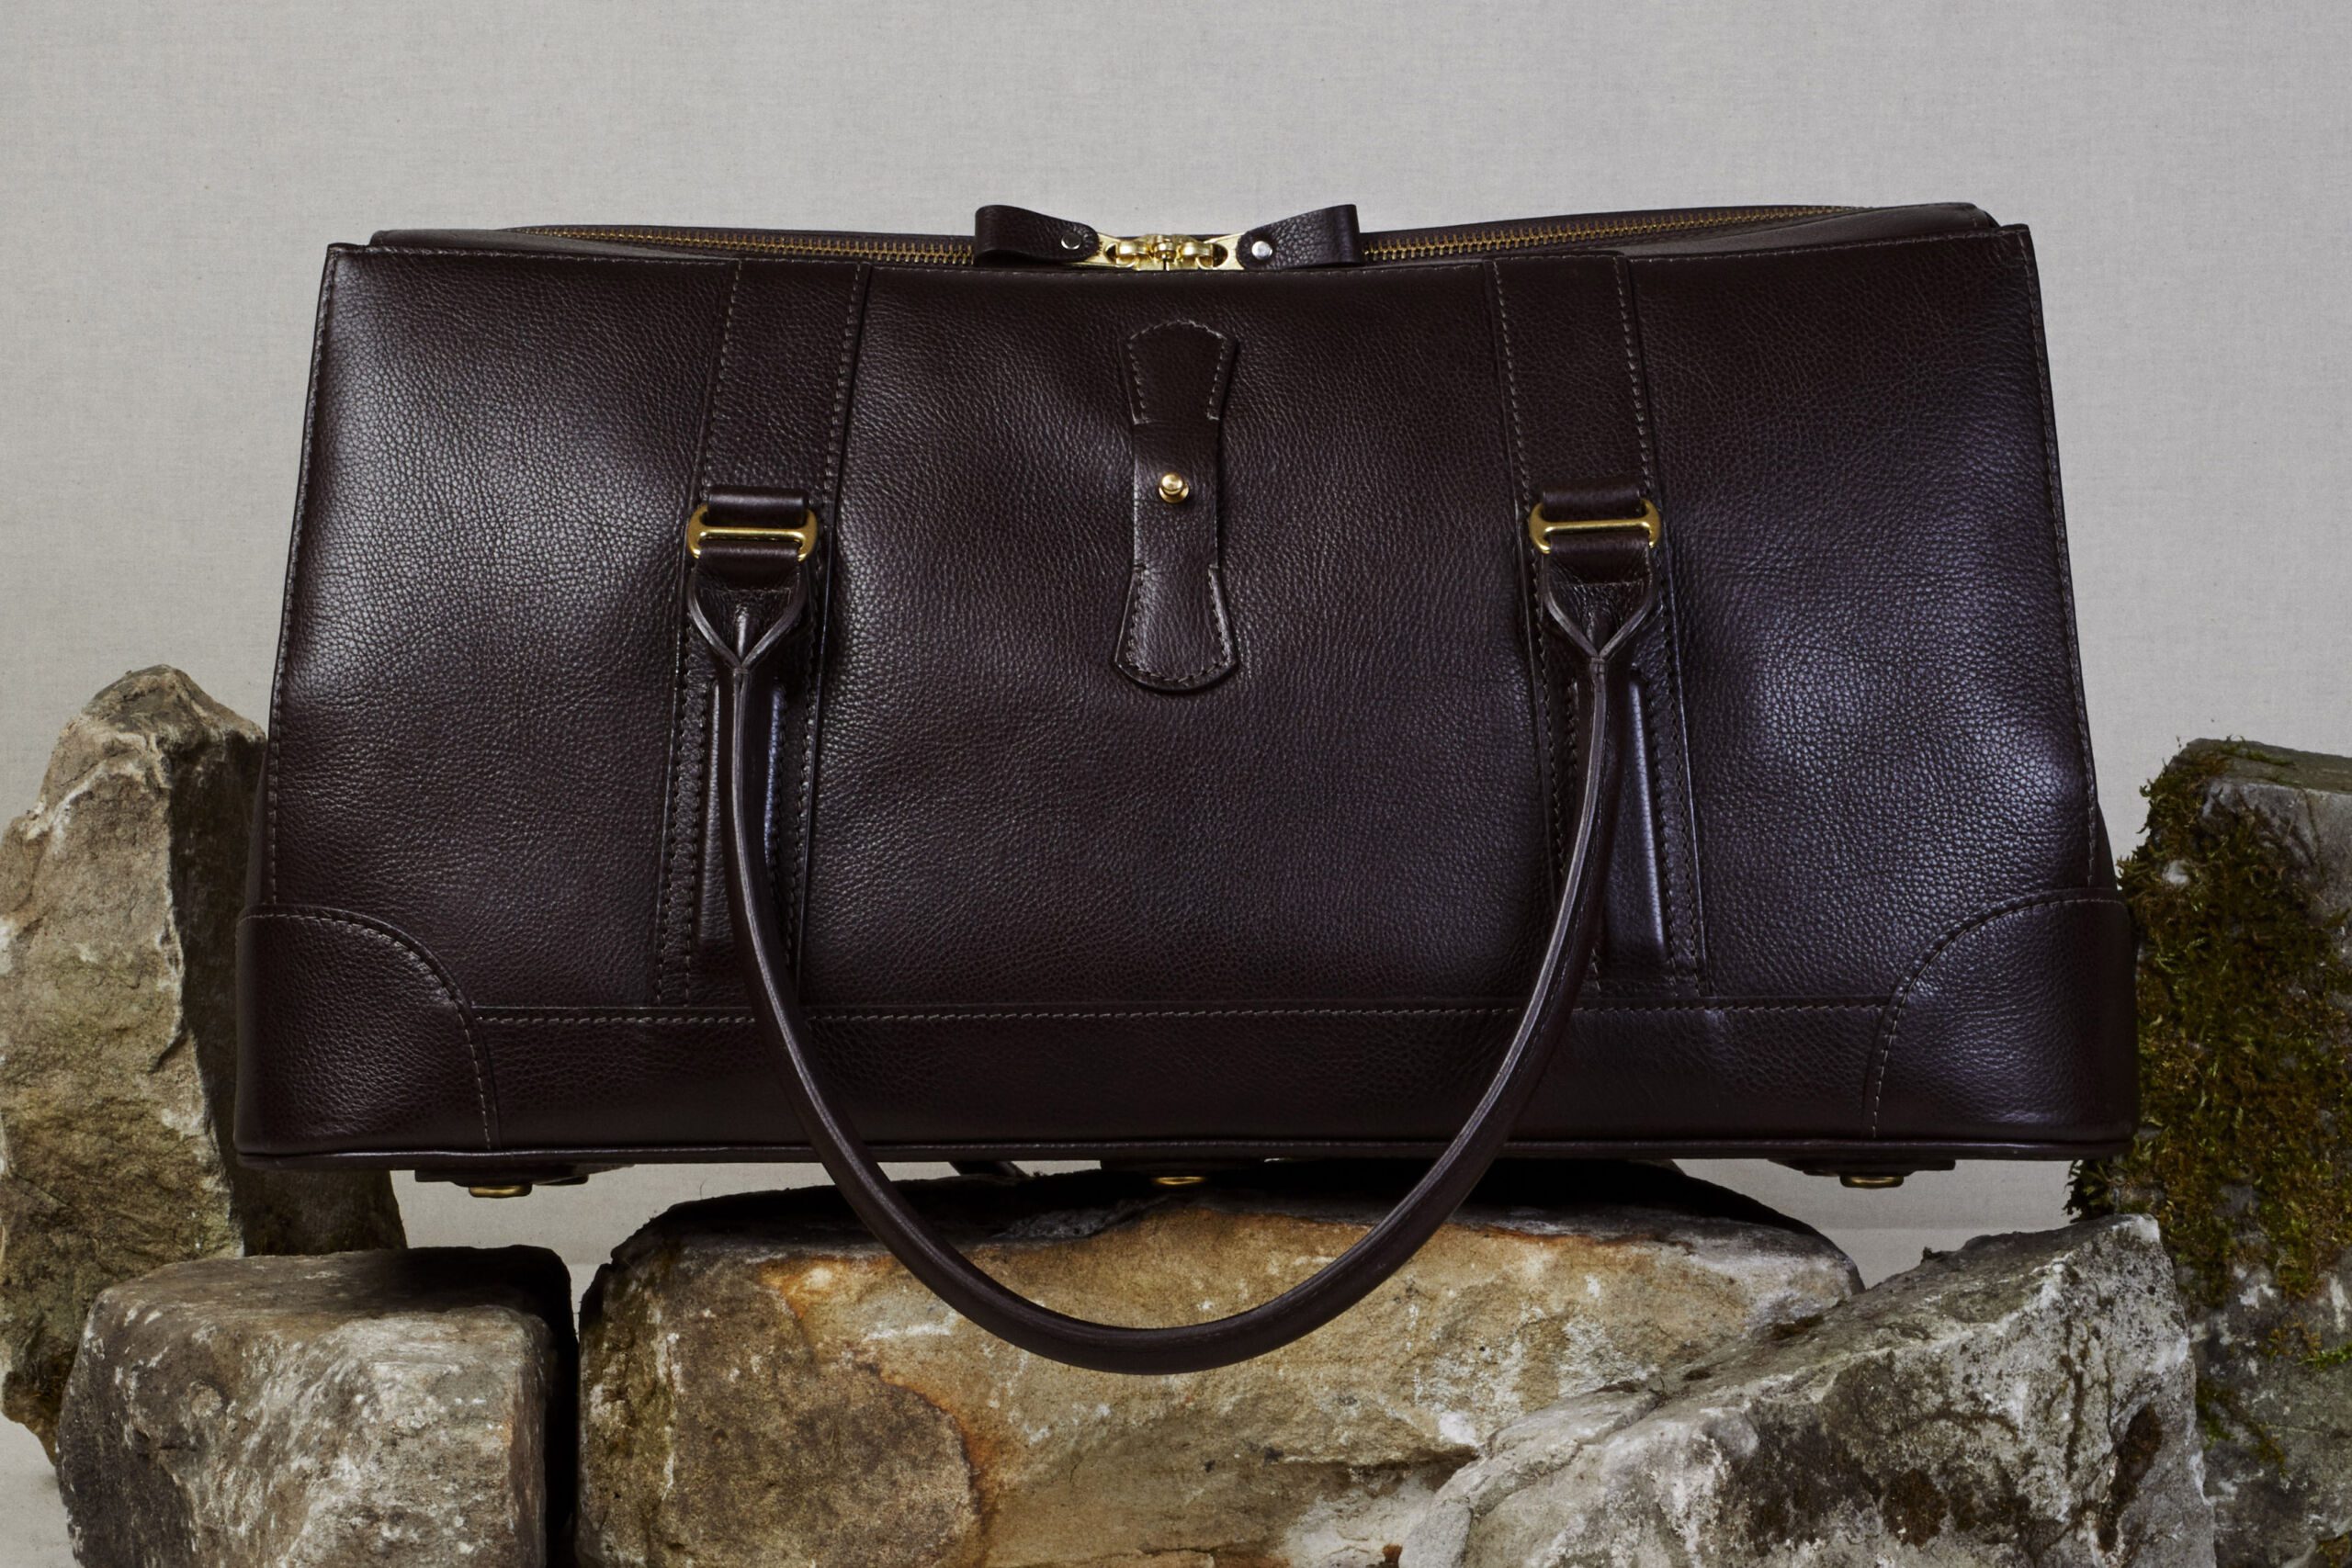 John Chapman Bags: Crafted with Purpose